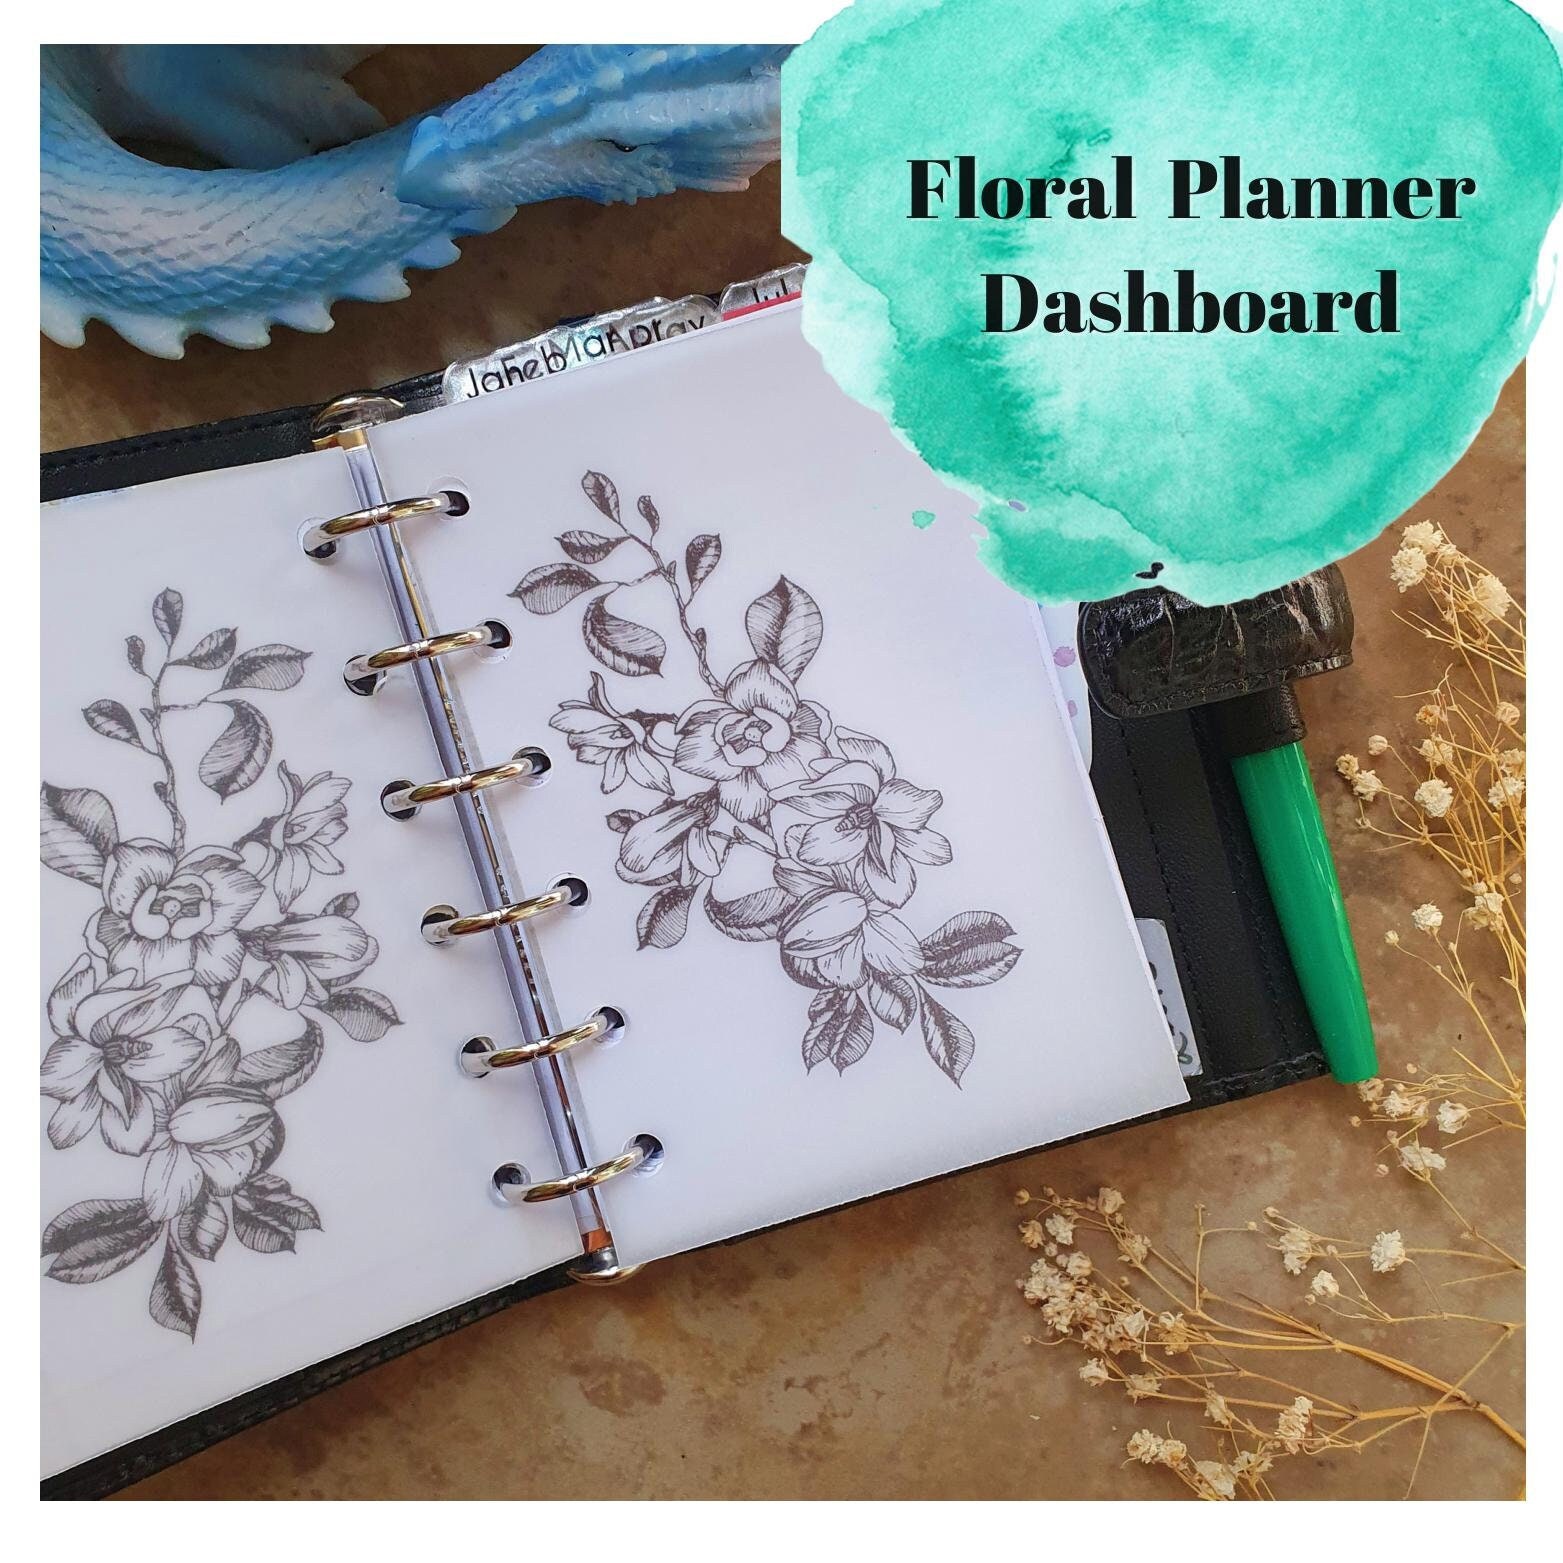 PVC Planner Divider Set 5pcs A5, A6 With Tabs // Journal Divider Bookmark  // Kikki K., Filofax // Journal Dashboard // Personal Dividers 